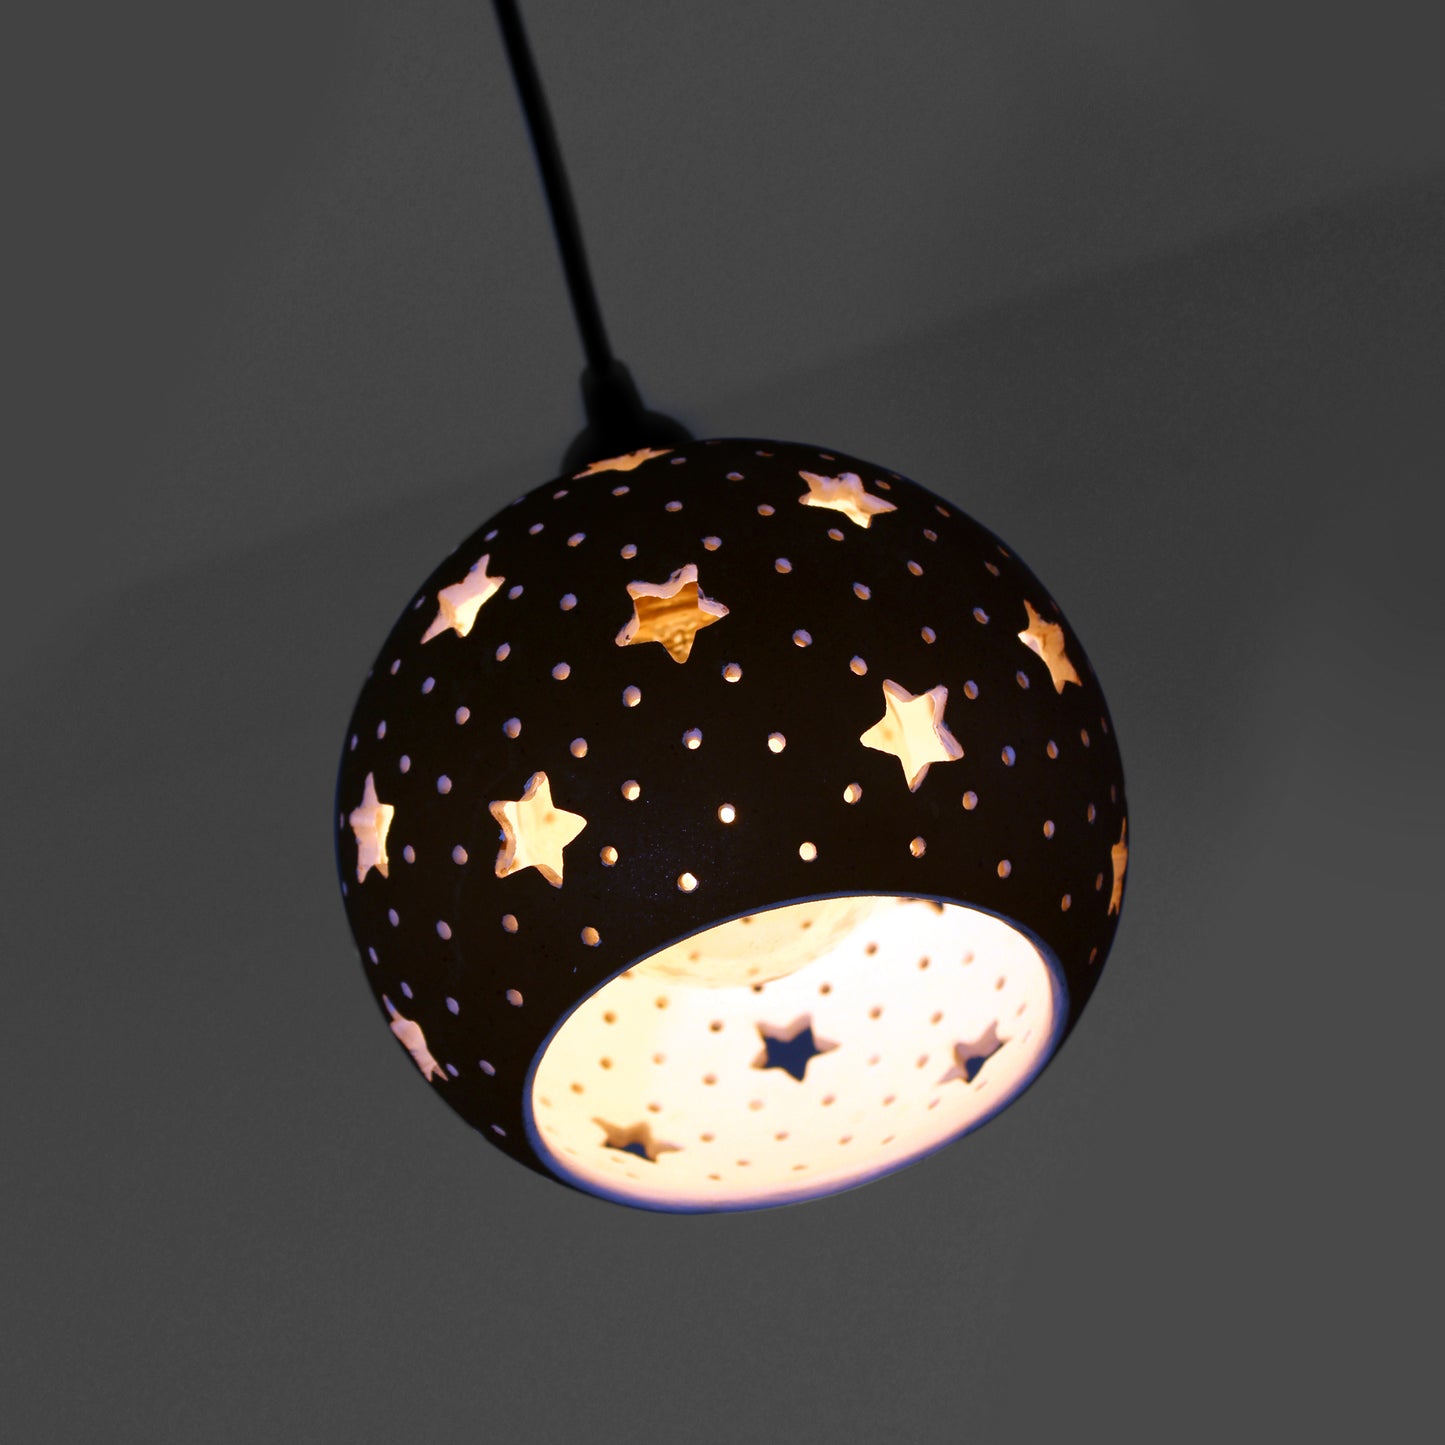 Handcrafted Terracotta GLO L STAR Ceiling Light